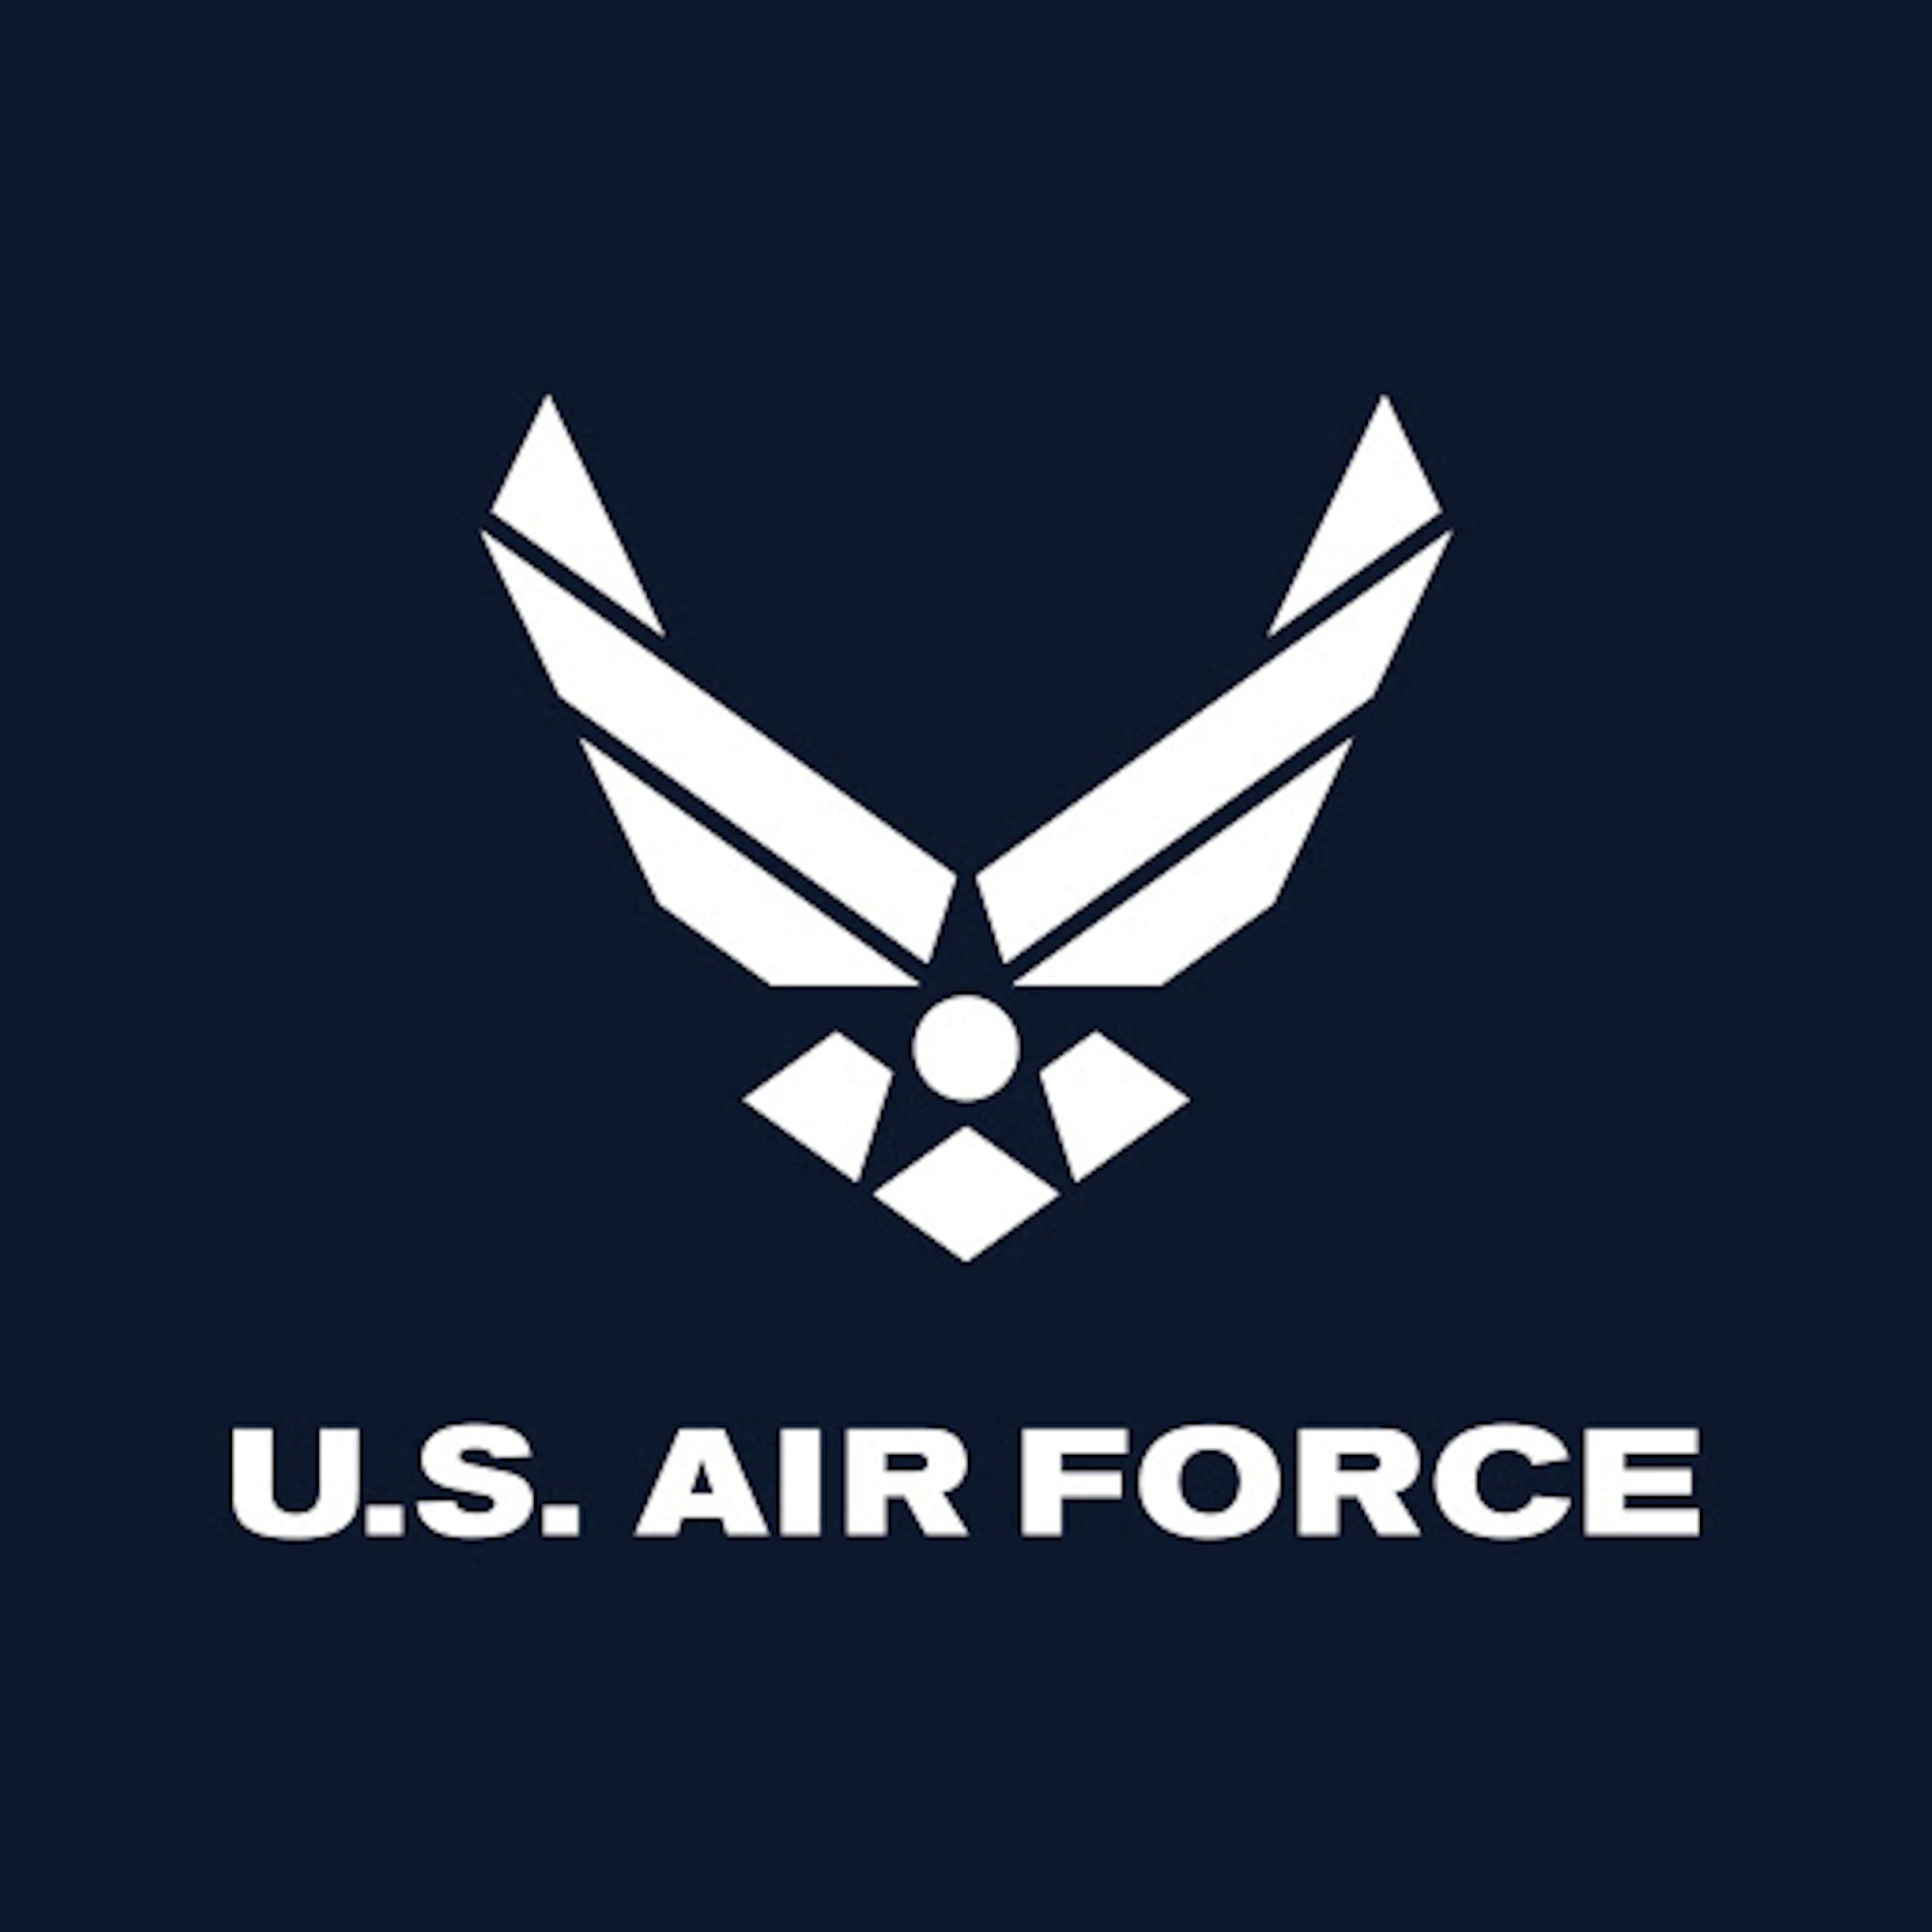 A picture of the U.S. Air Force symbol